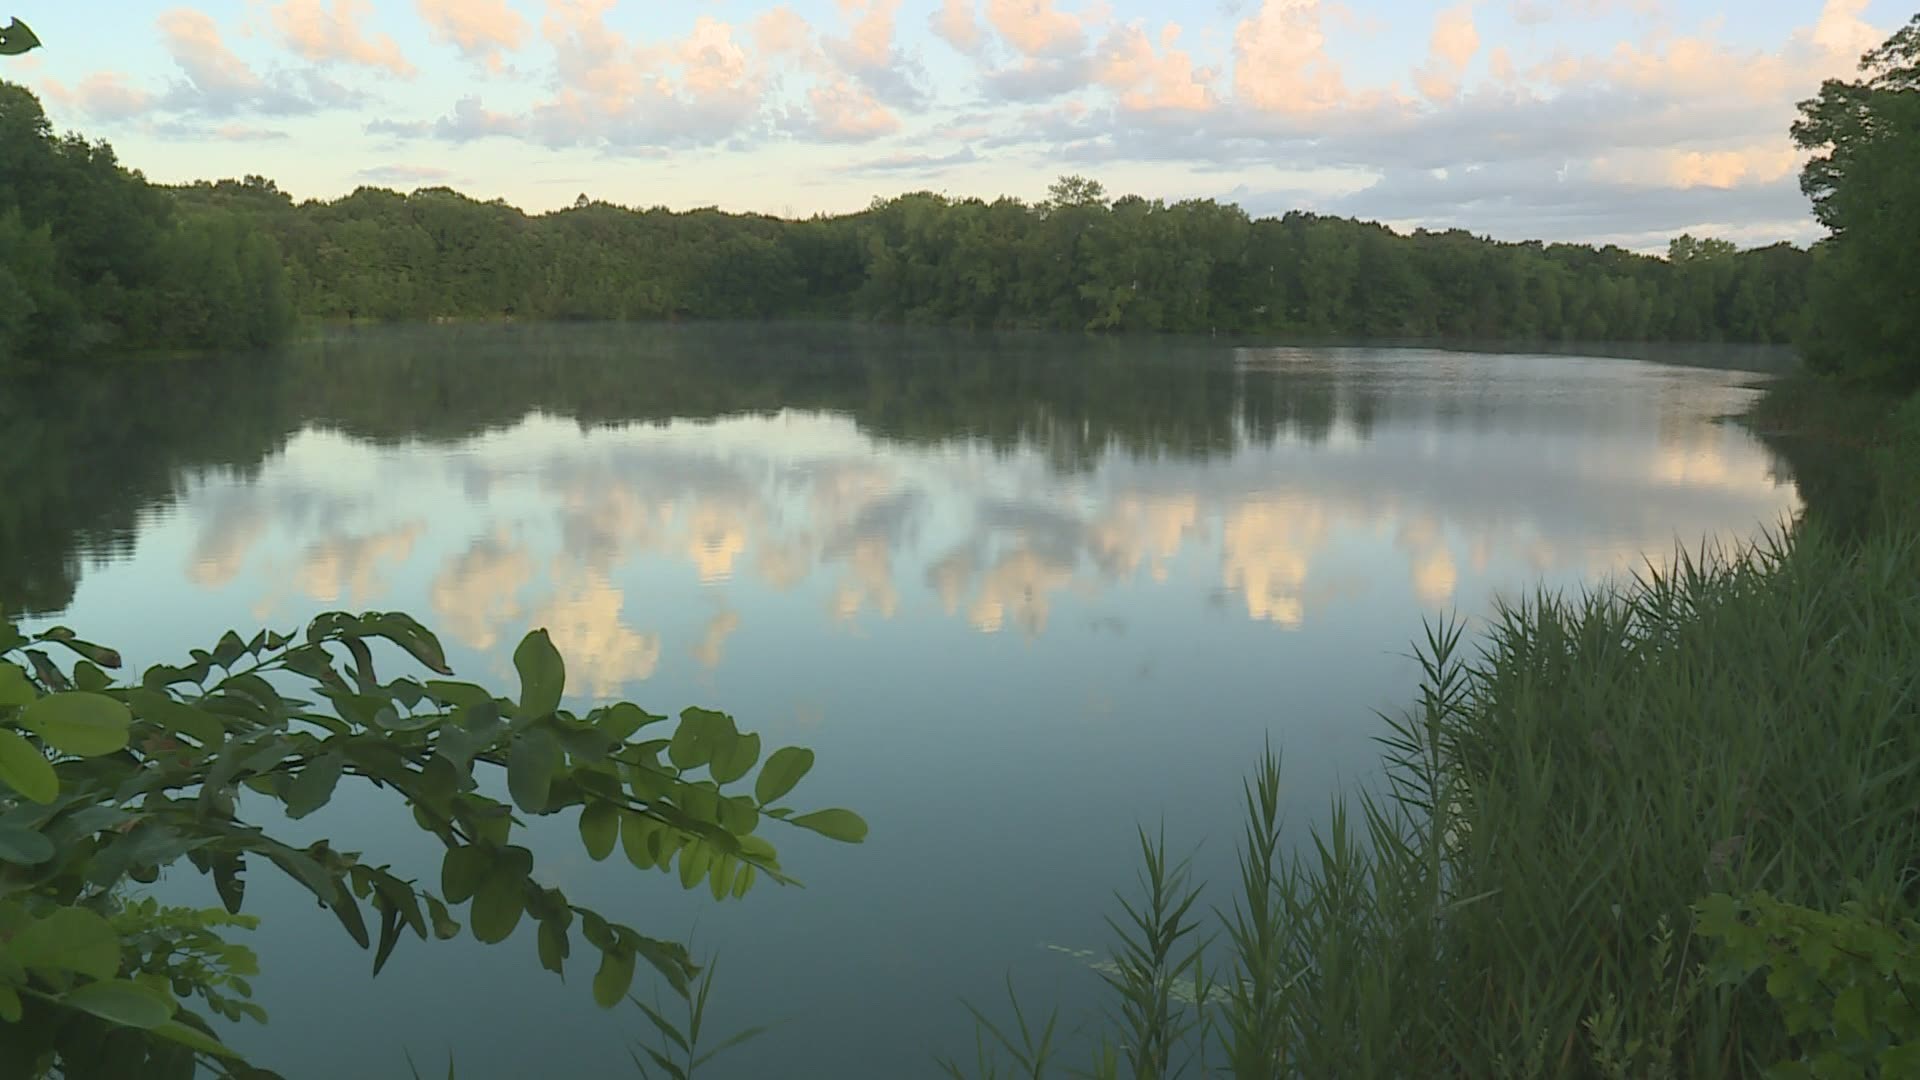 Police say they responded to the reservoir on calls of two people, a 23-year-old man, and a 17-year-old teenager, falling below the surface of the water.